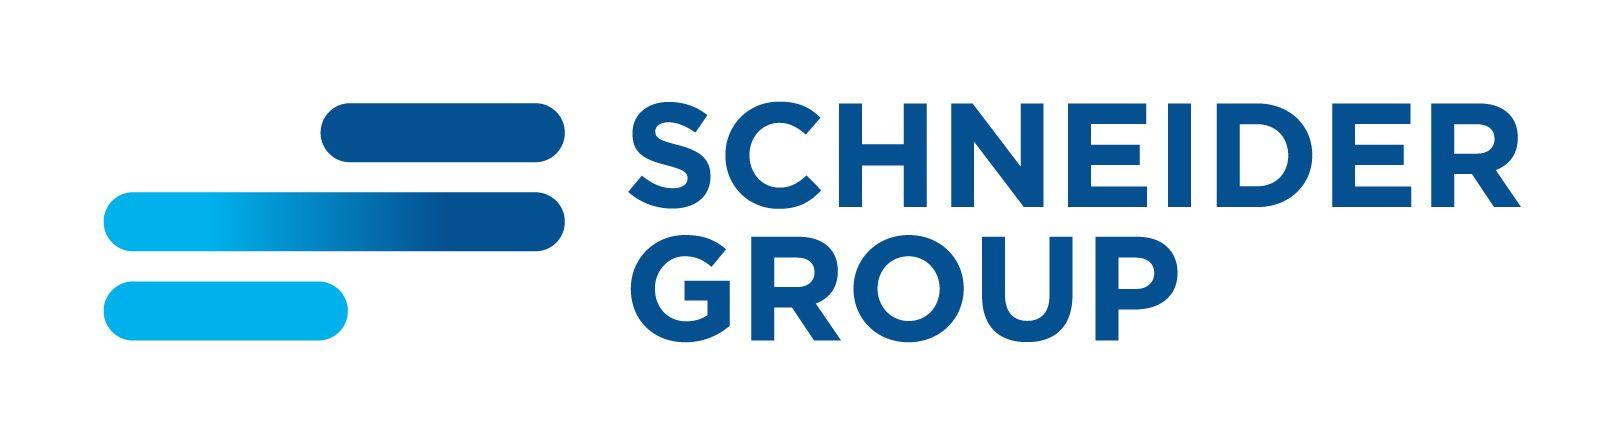 Shneider Logo - SCHNEIDER GROUP | Accounting, Taxes, Export, IT/ERP | Consulting ...